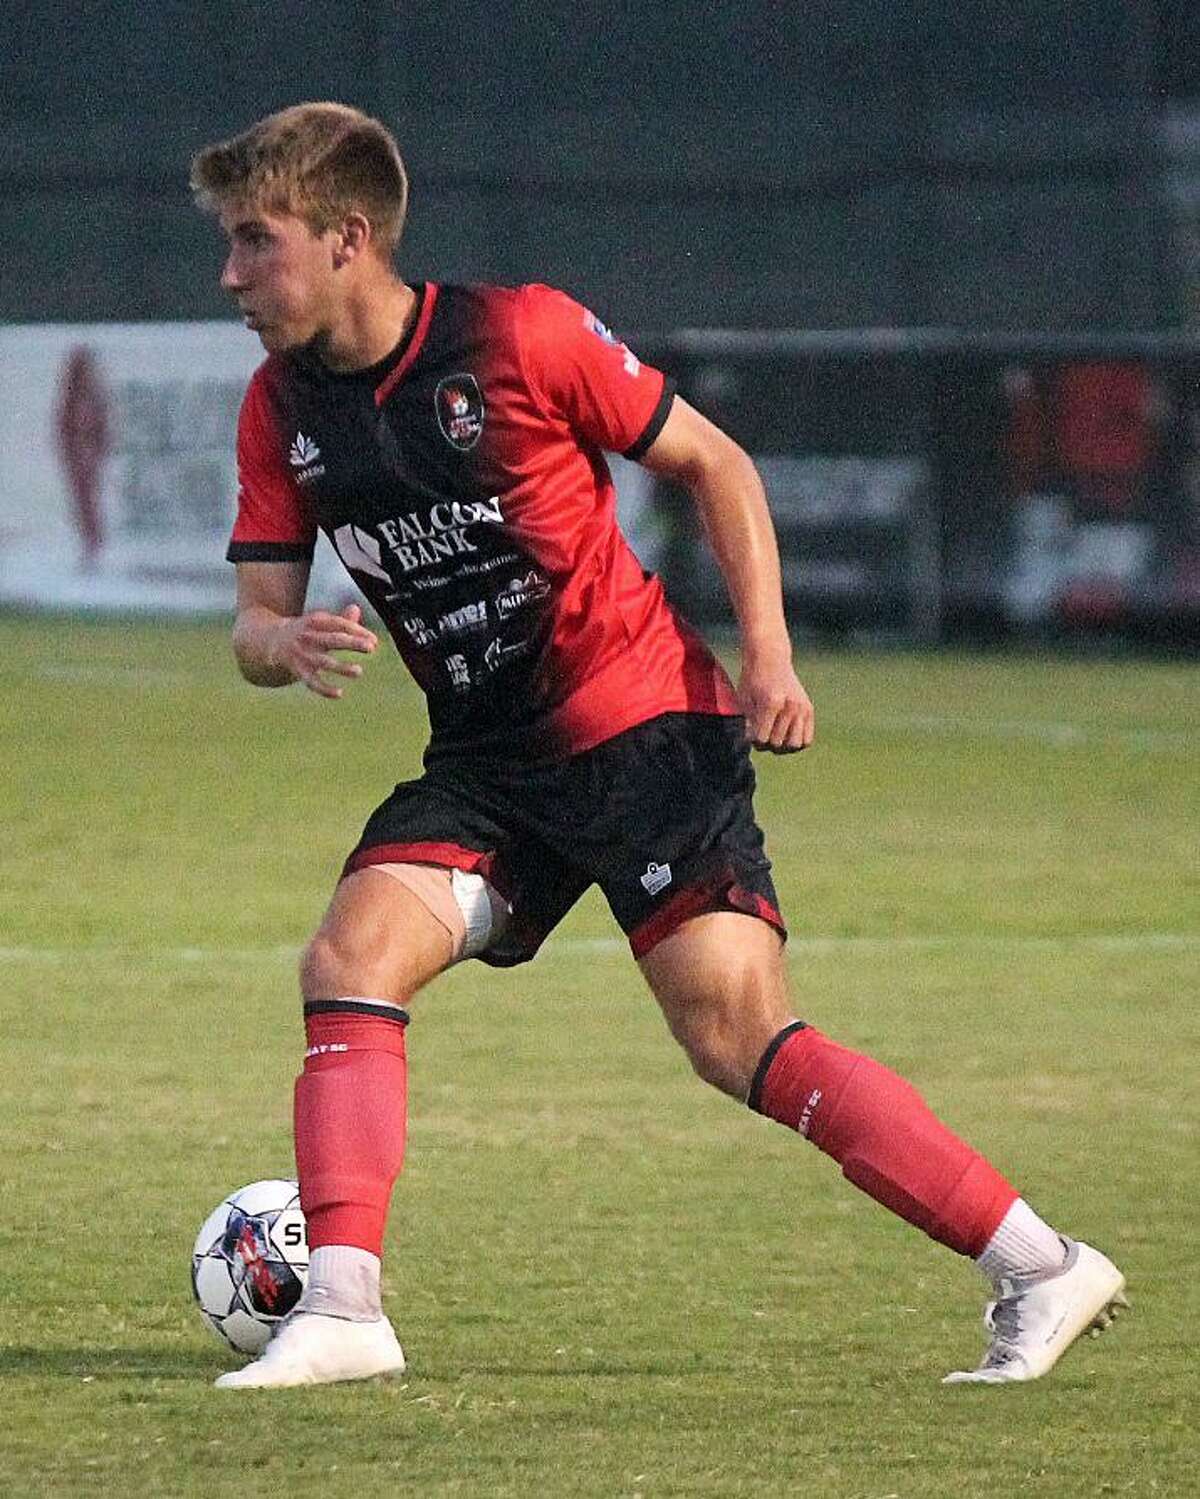 Laredo Heat midfielder Colton Schafer is a player who does not get as much praise as he may deserve.